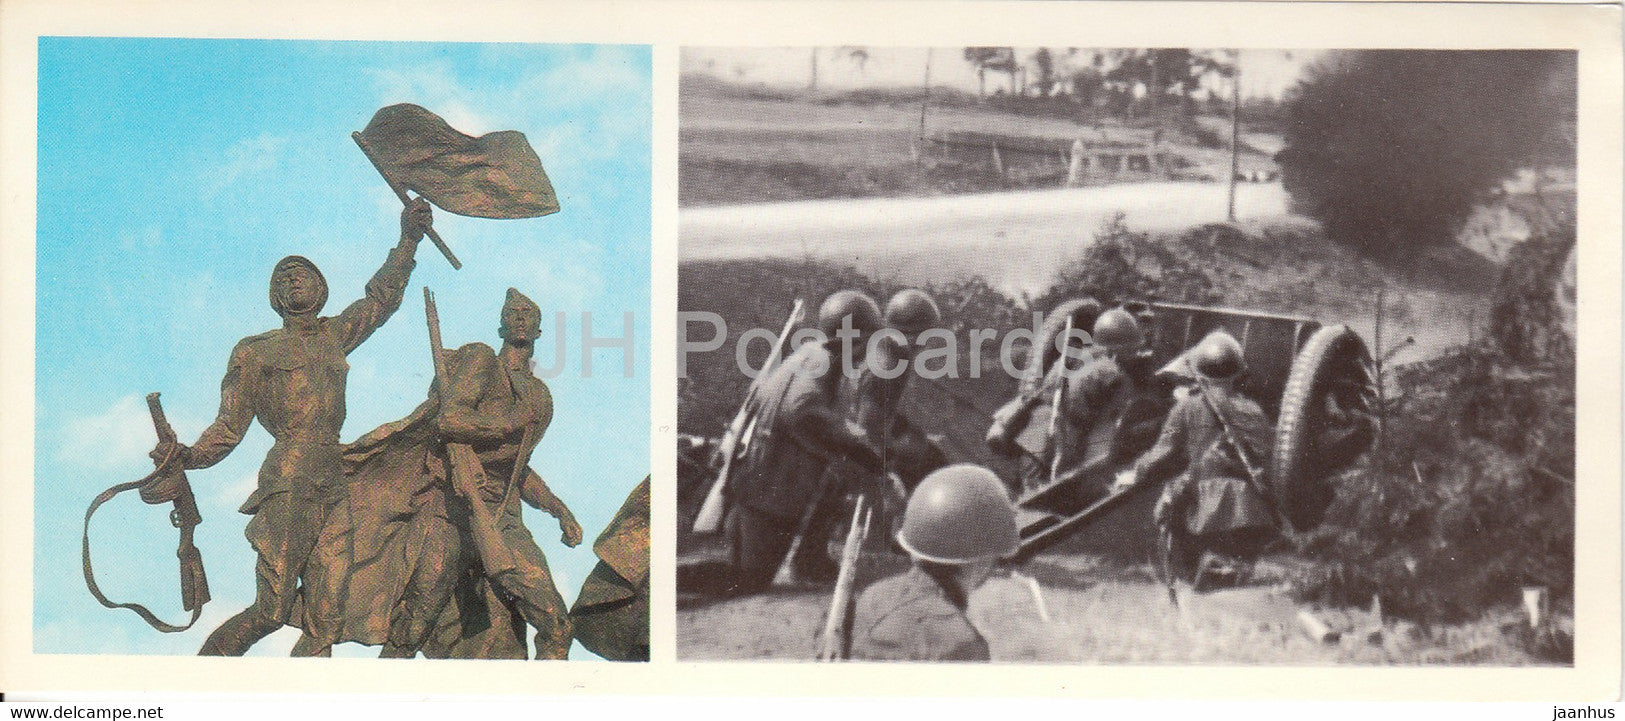 Monument to the Heroic Defenders of Leningrad - Soldiers - cannon - memorial - 1976 - Russia USSR - unused - JH Postcards